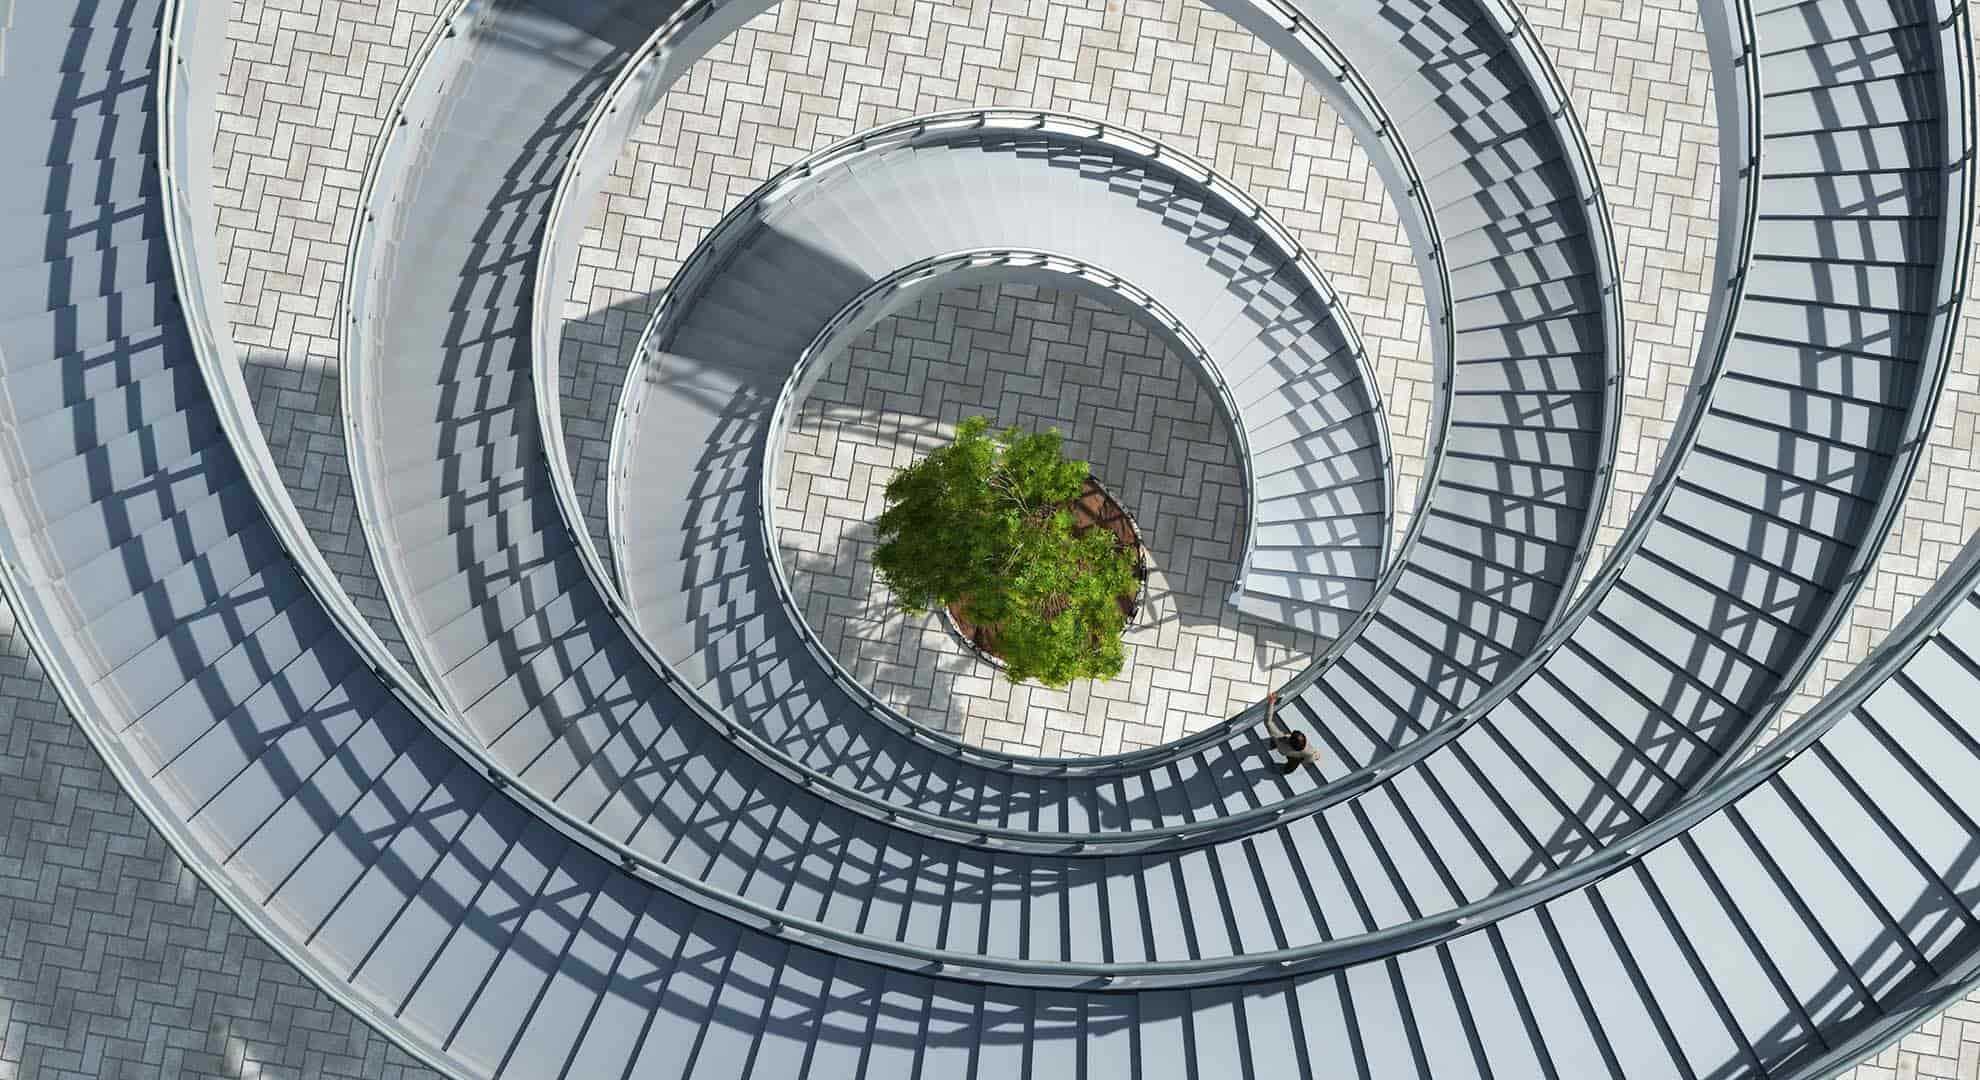 Photo looking down on a circular staircase with a tree in the middle